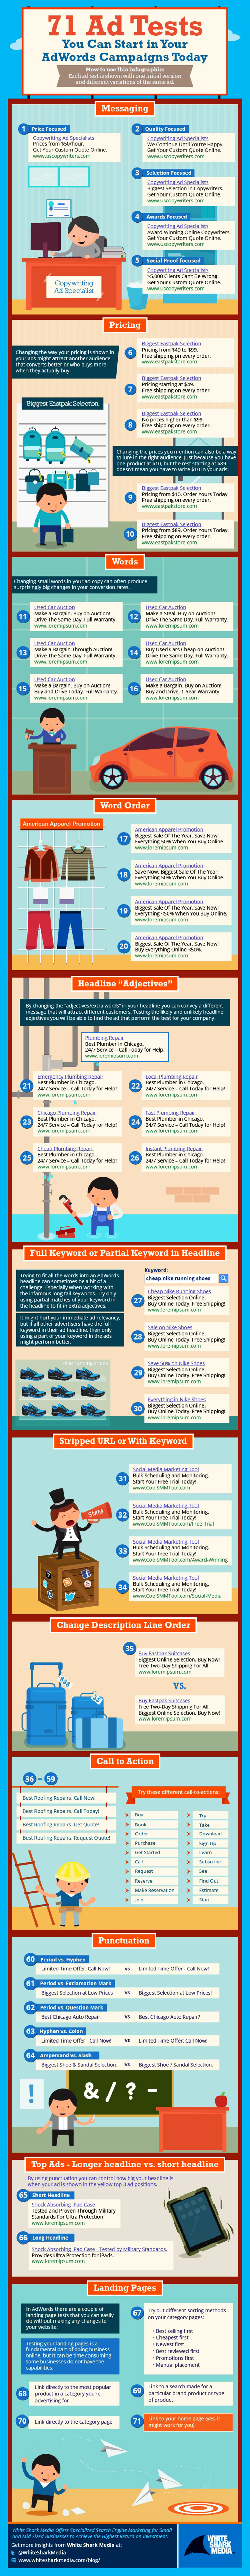 Tests You Can Start in Your AdWords Online Advertising Infographic